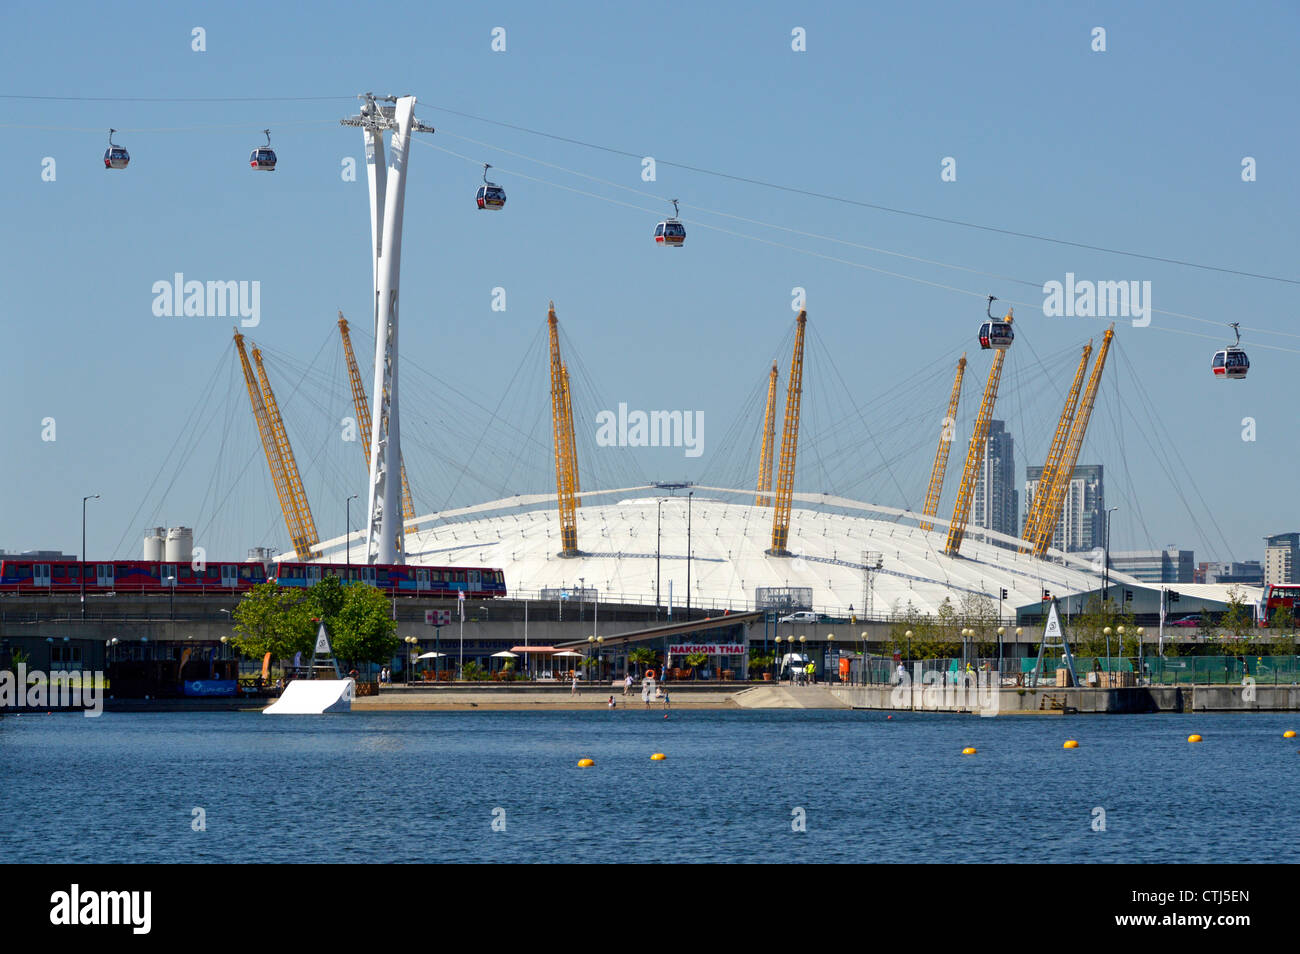 Emirates Air Line cable cars seen in front of The O2 arena dome viewed from Royal Docks crossing River Thames linking to North Greenwich England UK Stock Photo